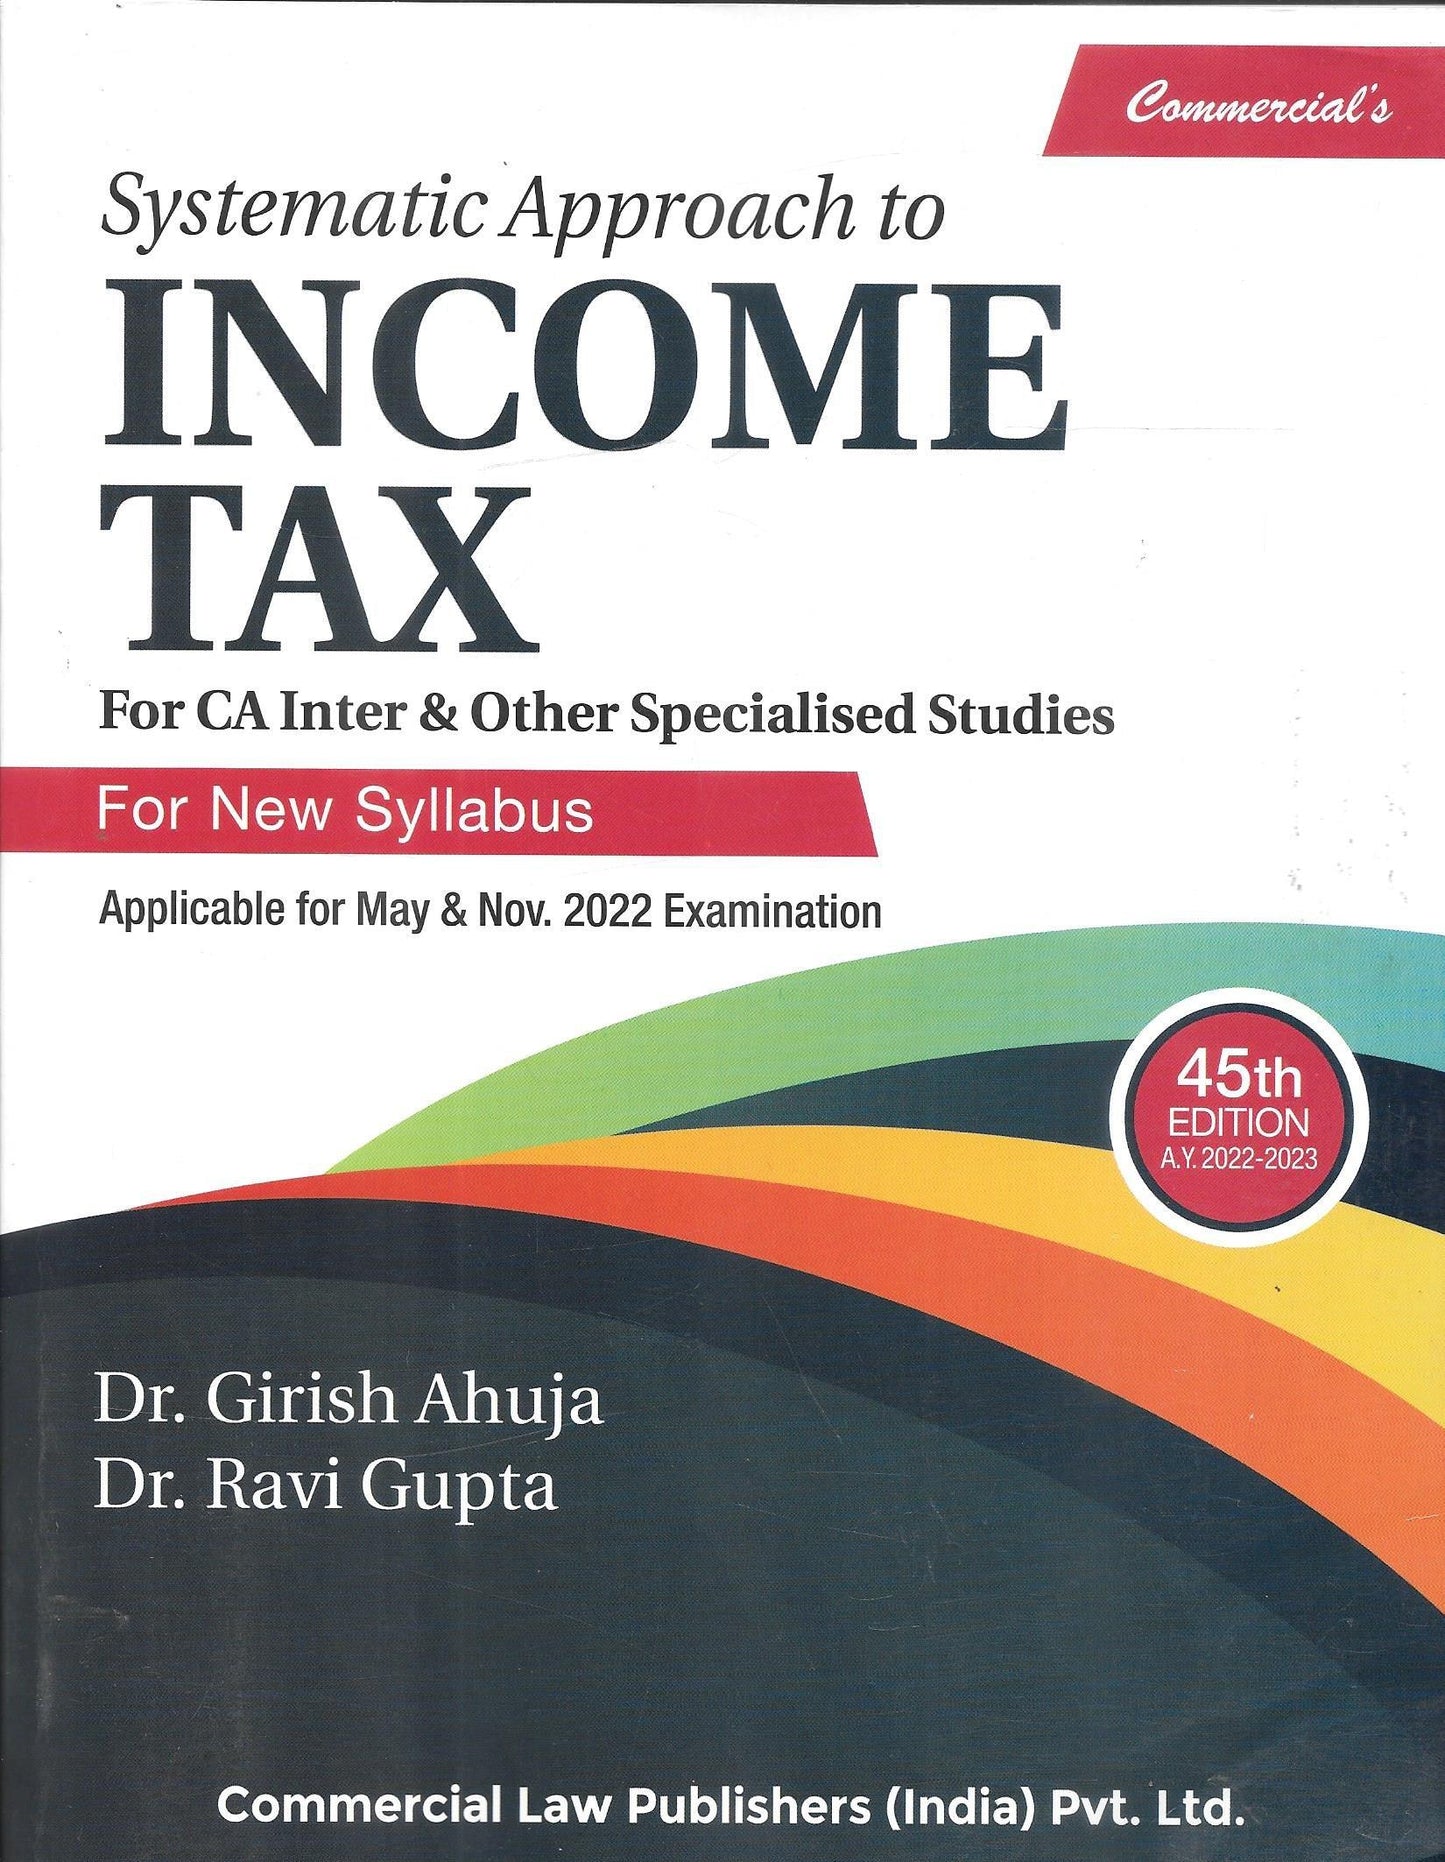 Systematic Approach to Income Tax for CA Inter and Other Specialised Studies - M&J Services